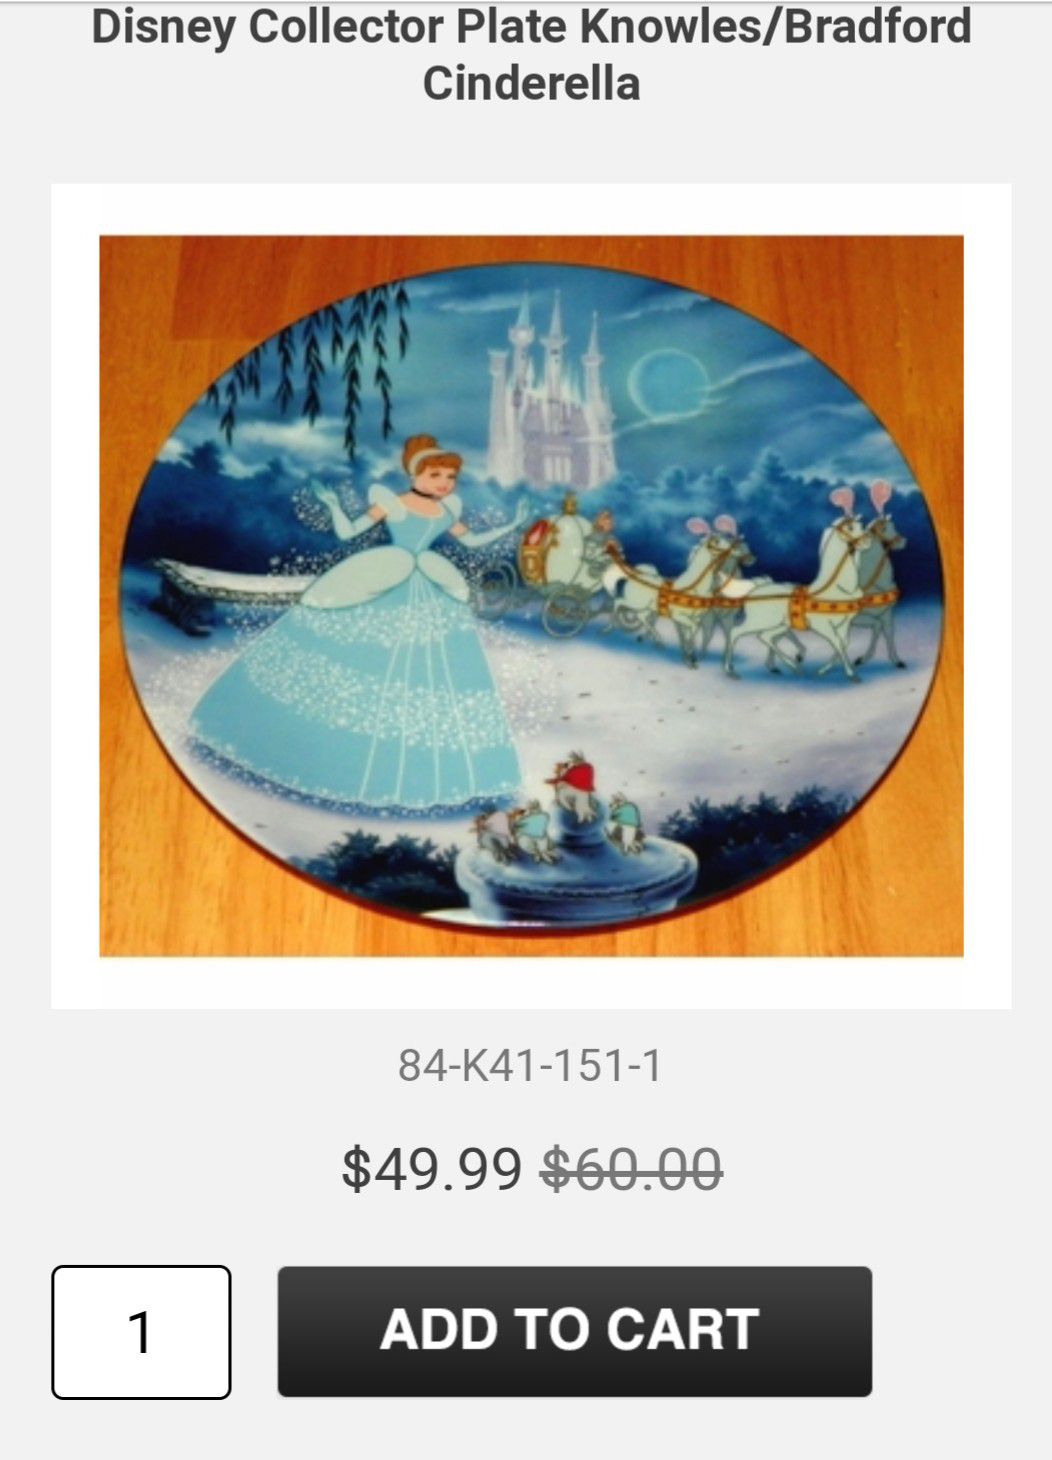 Cinderella plate collection